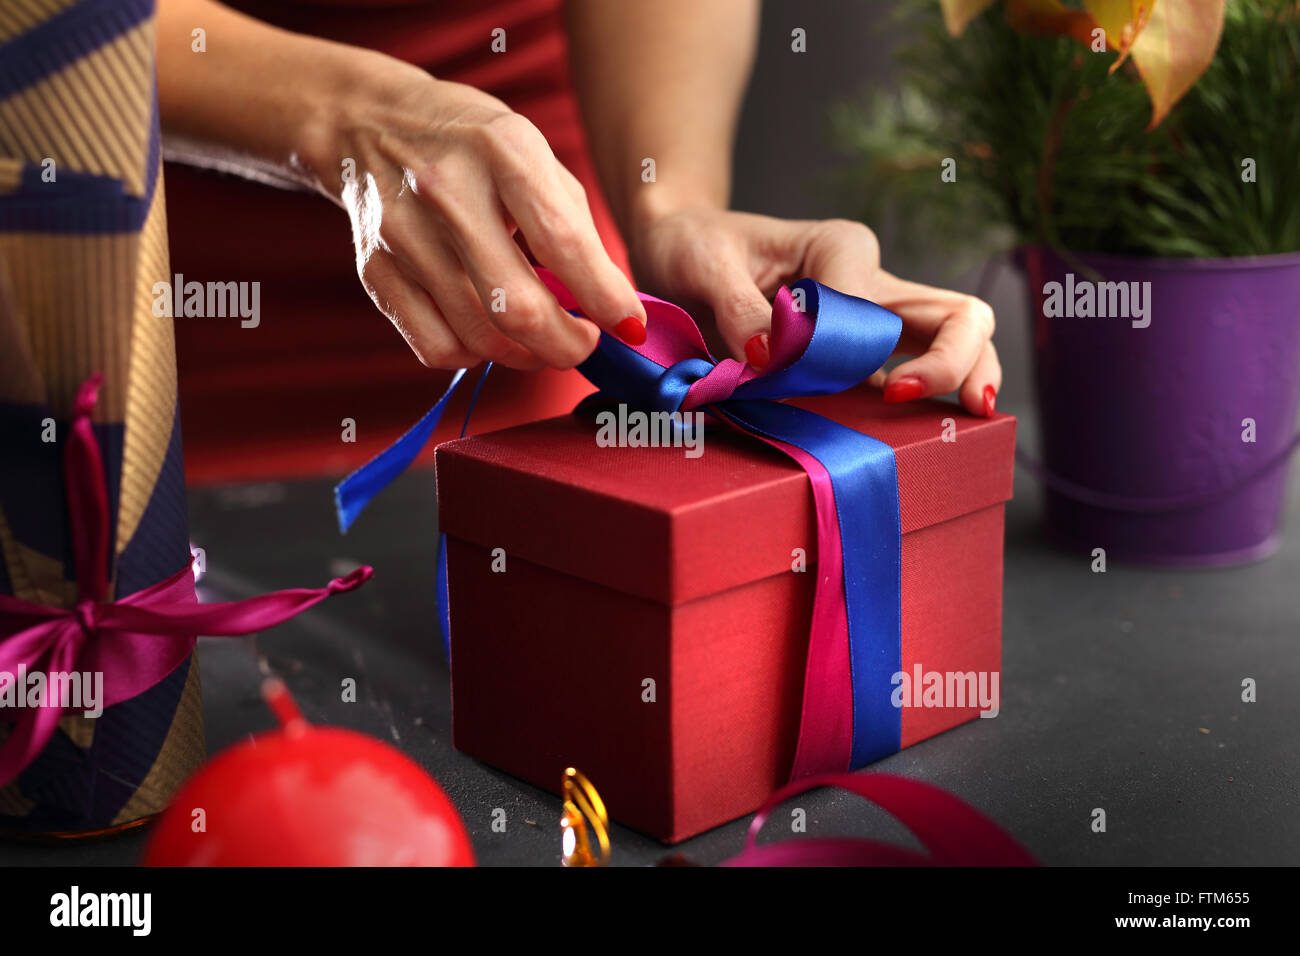 Gift wrapping. Christmas gift idea how to decorate a gift. Beautifully wrapped gift. Stock Photo